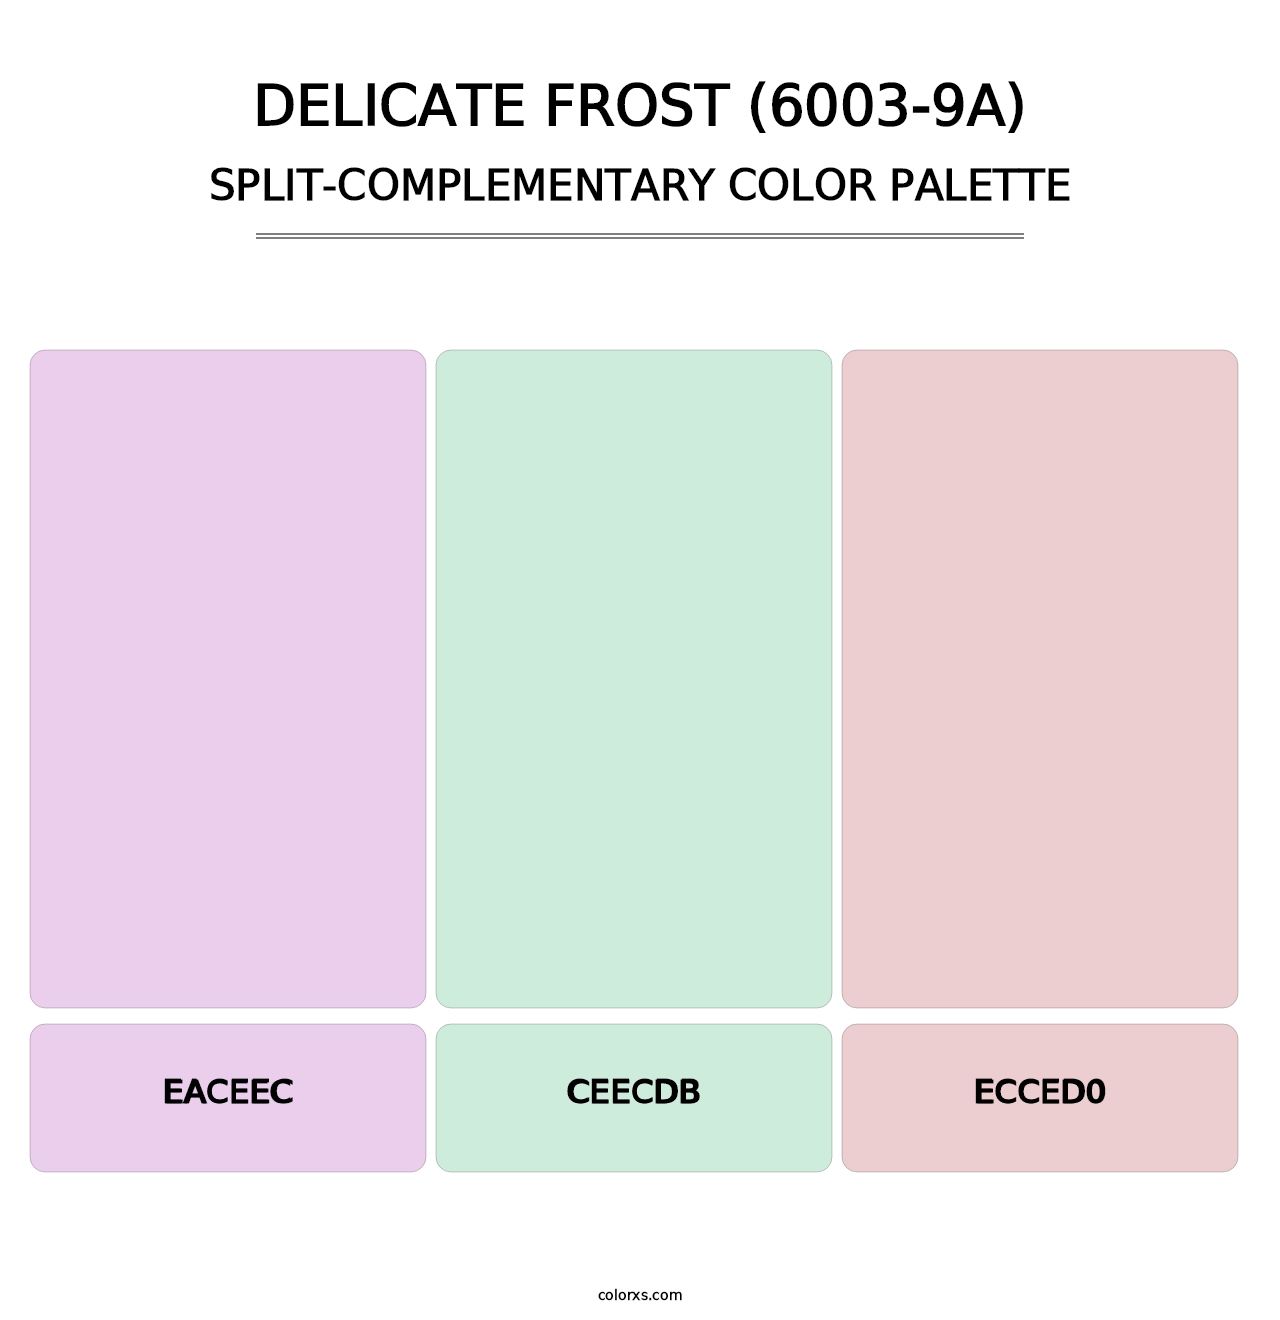 Delicate Frost (6003-9A) - Split-Complementary Color Palette